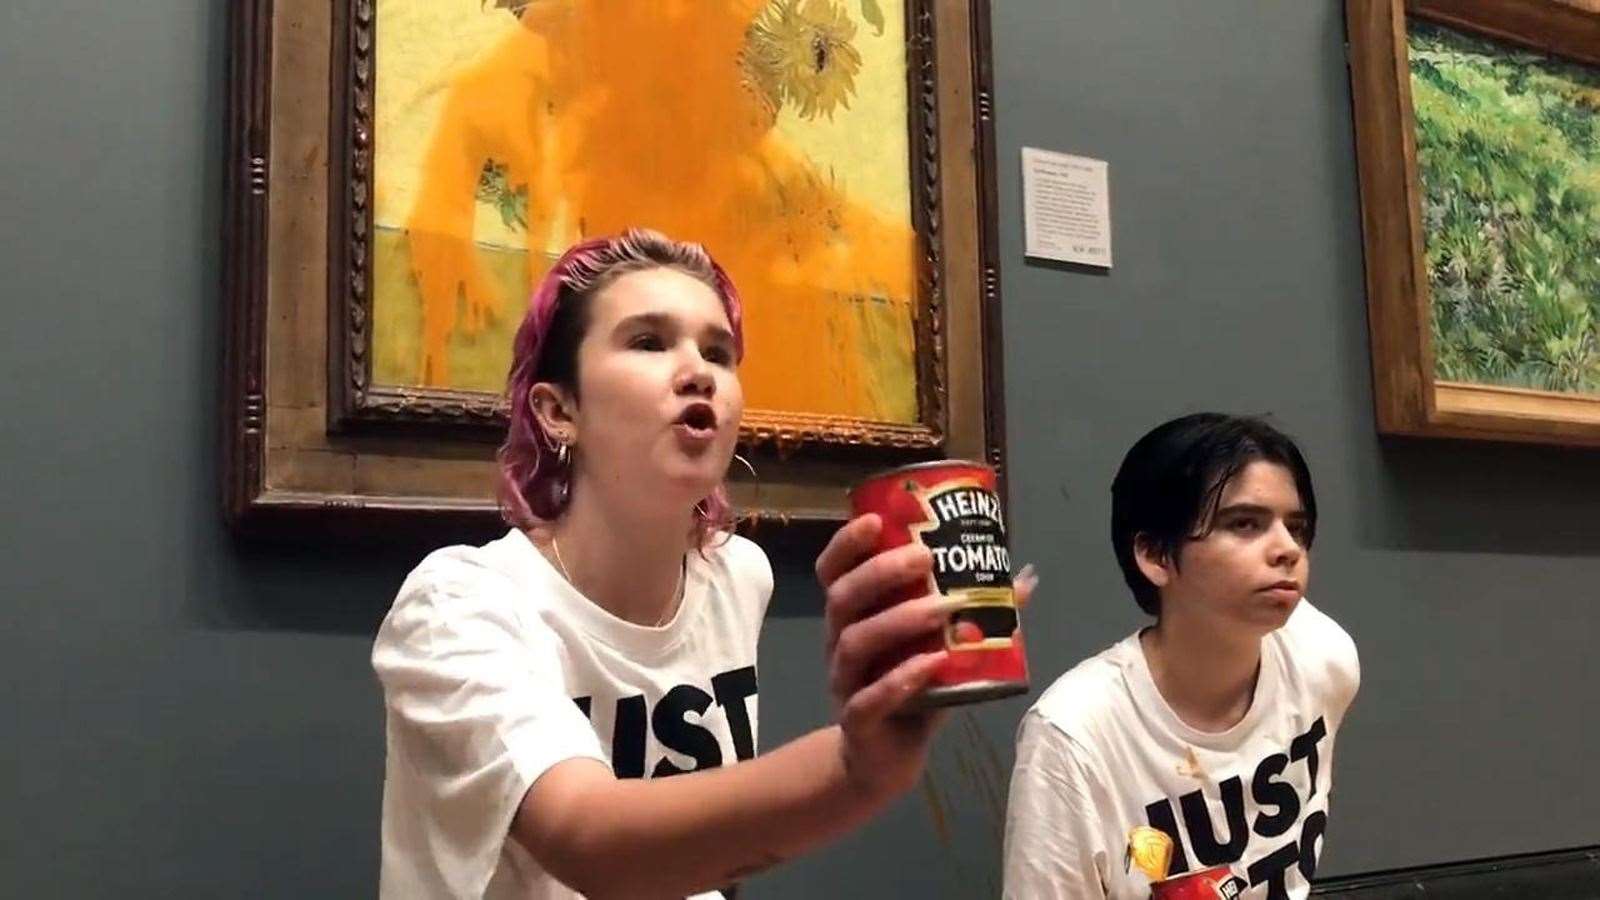 Two protesters threw tinned soup at Vincent Van Gogh’s 1888 work Sunflowers at the National Gallery in London (Just Stop Oil/PA)